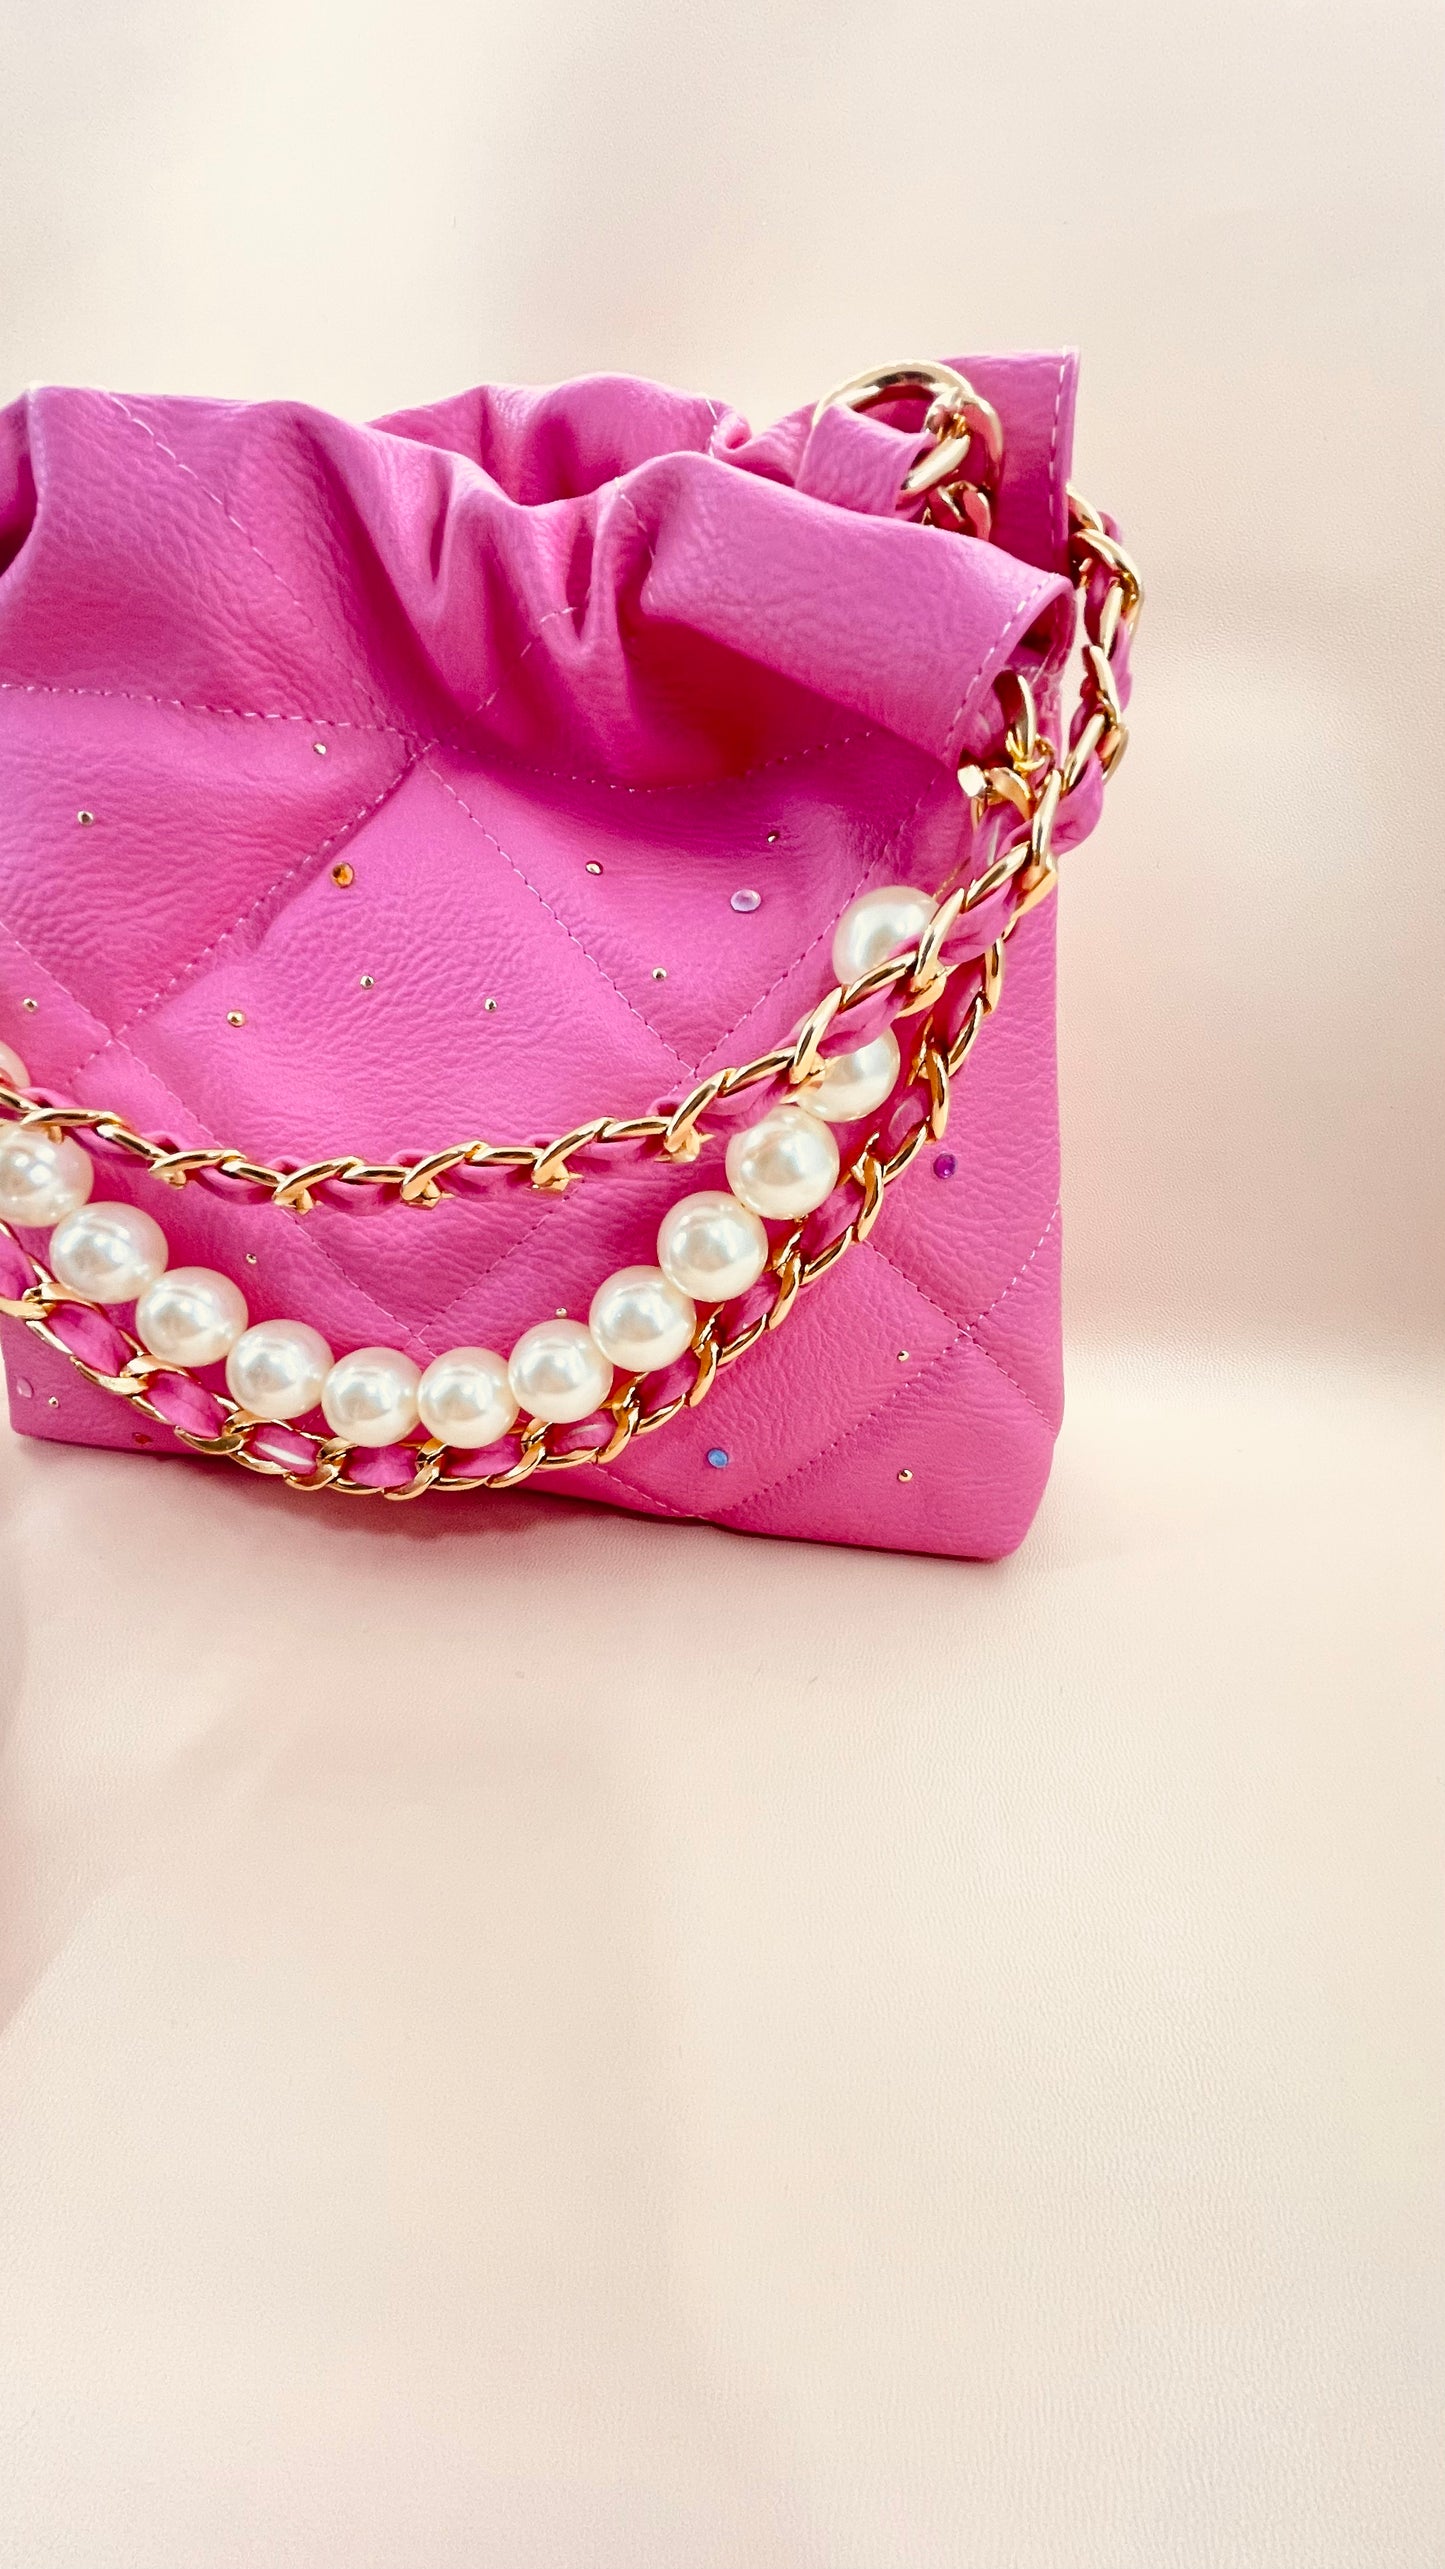 THE PETIT COCO BAG - PINK